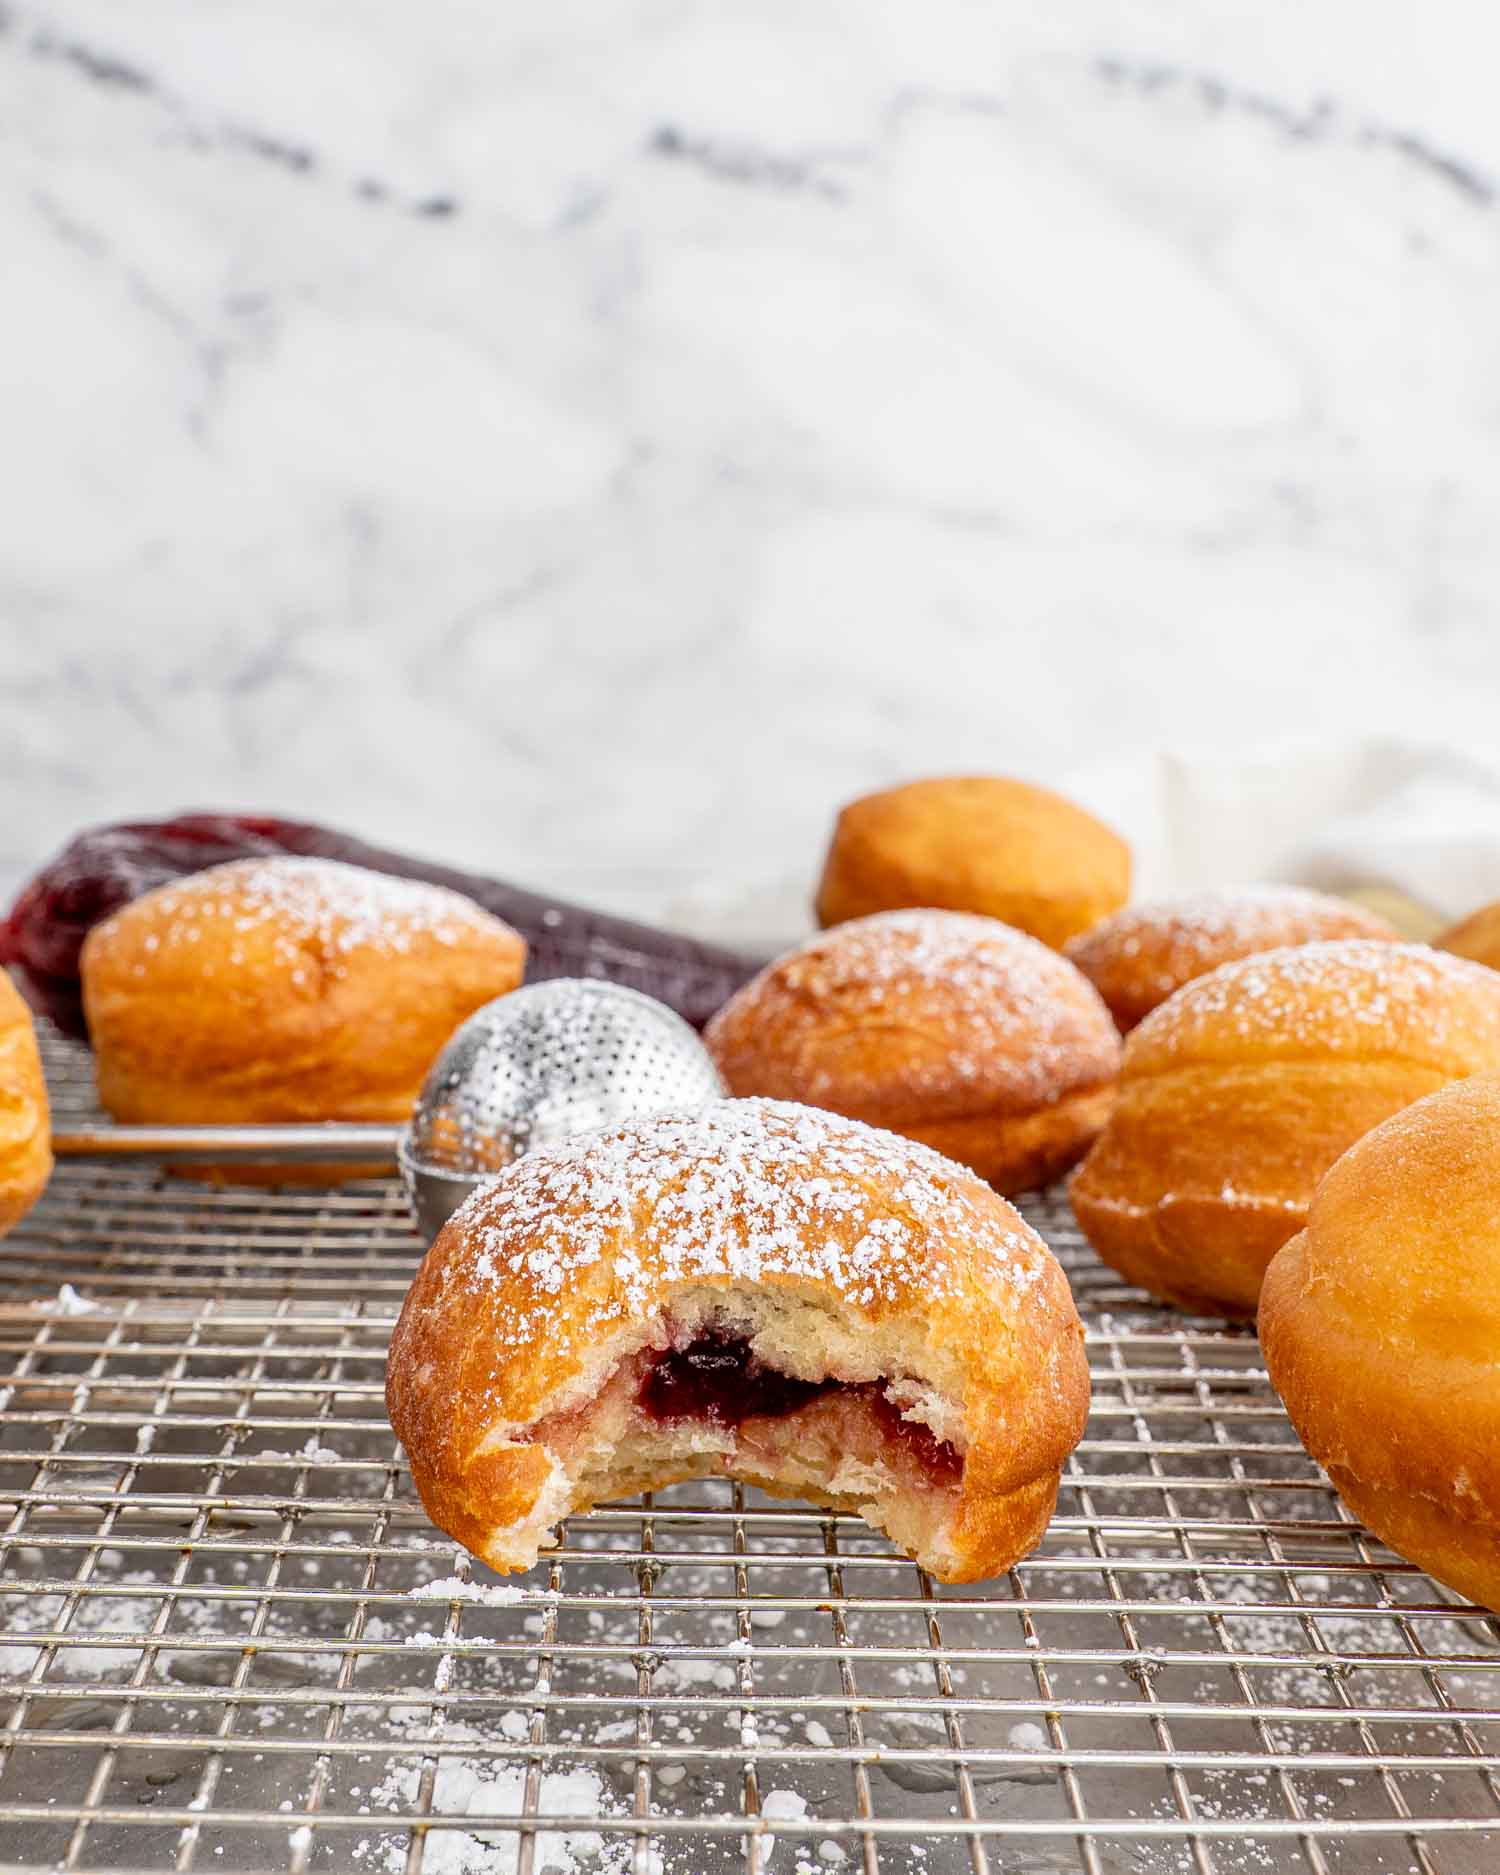 jelly donuts filled with cherry jelly on a cooling rack over a baking sheet.